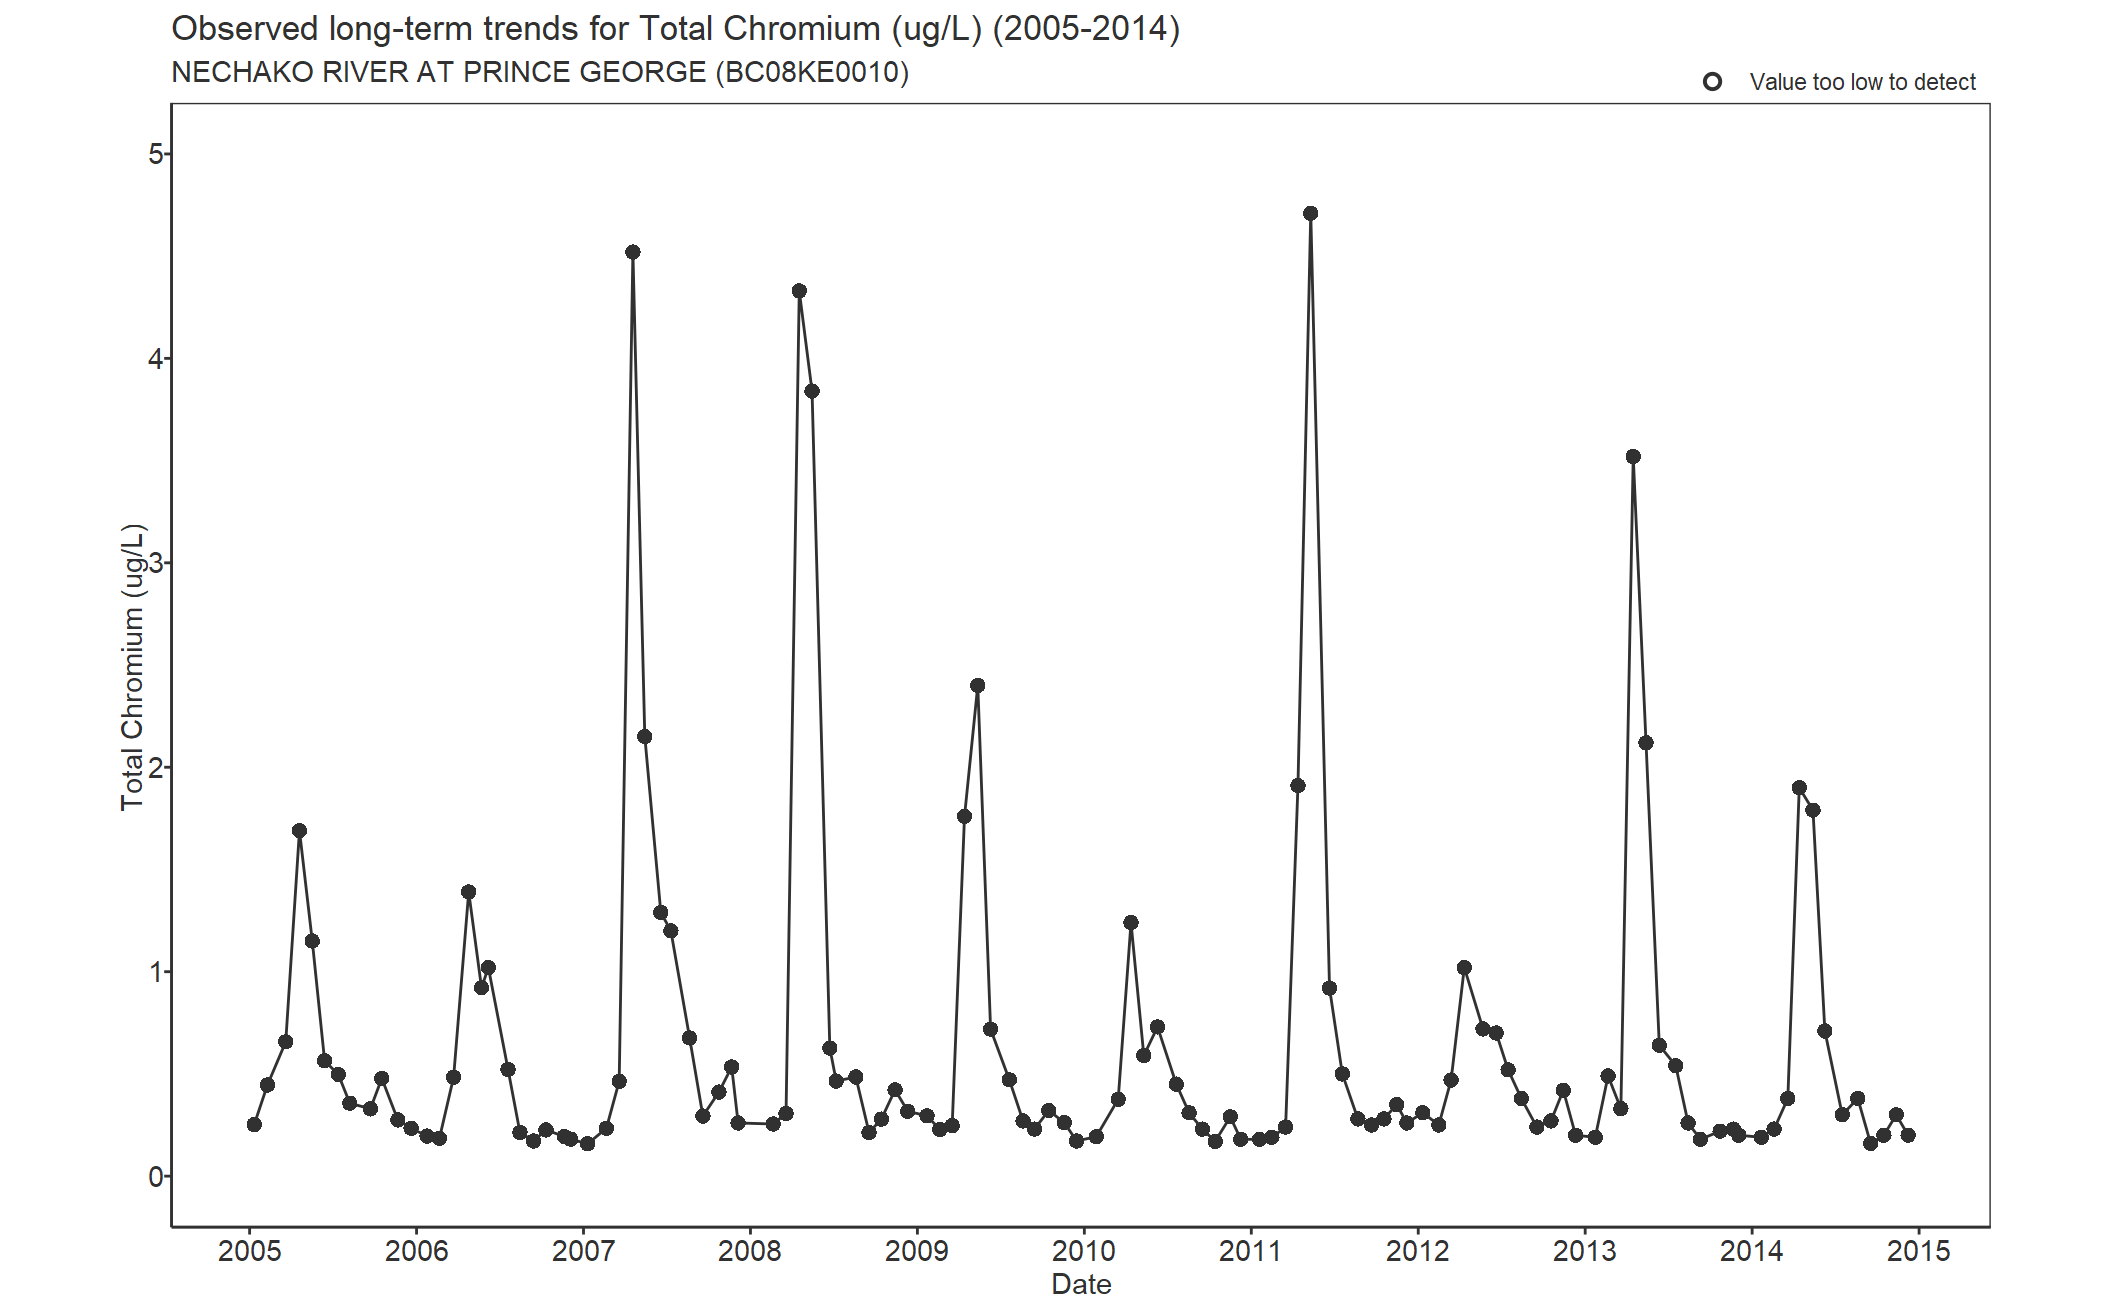 Observed long-term trends for Chromium Total (2005-2014)